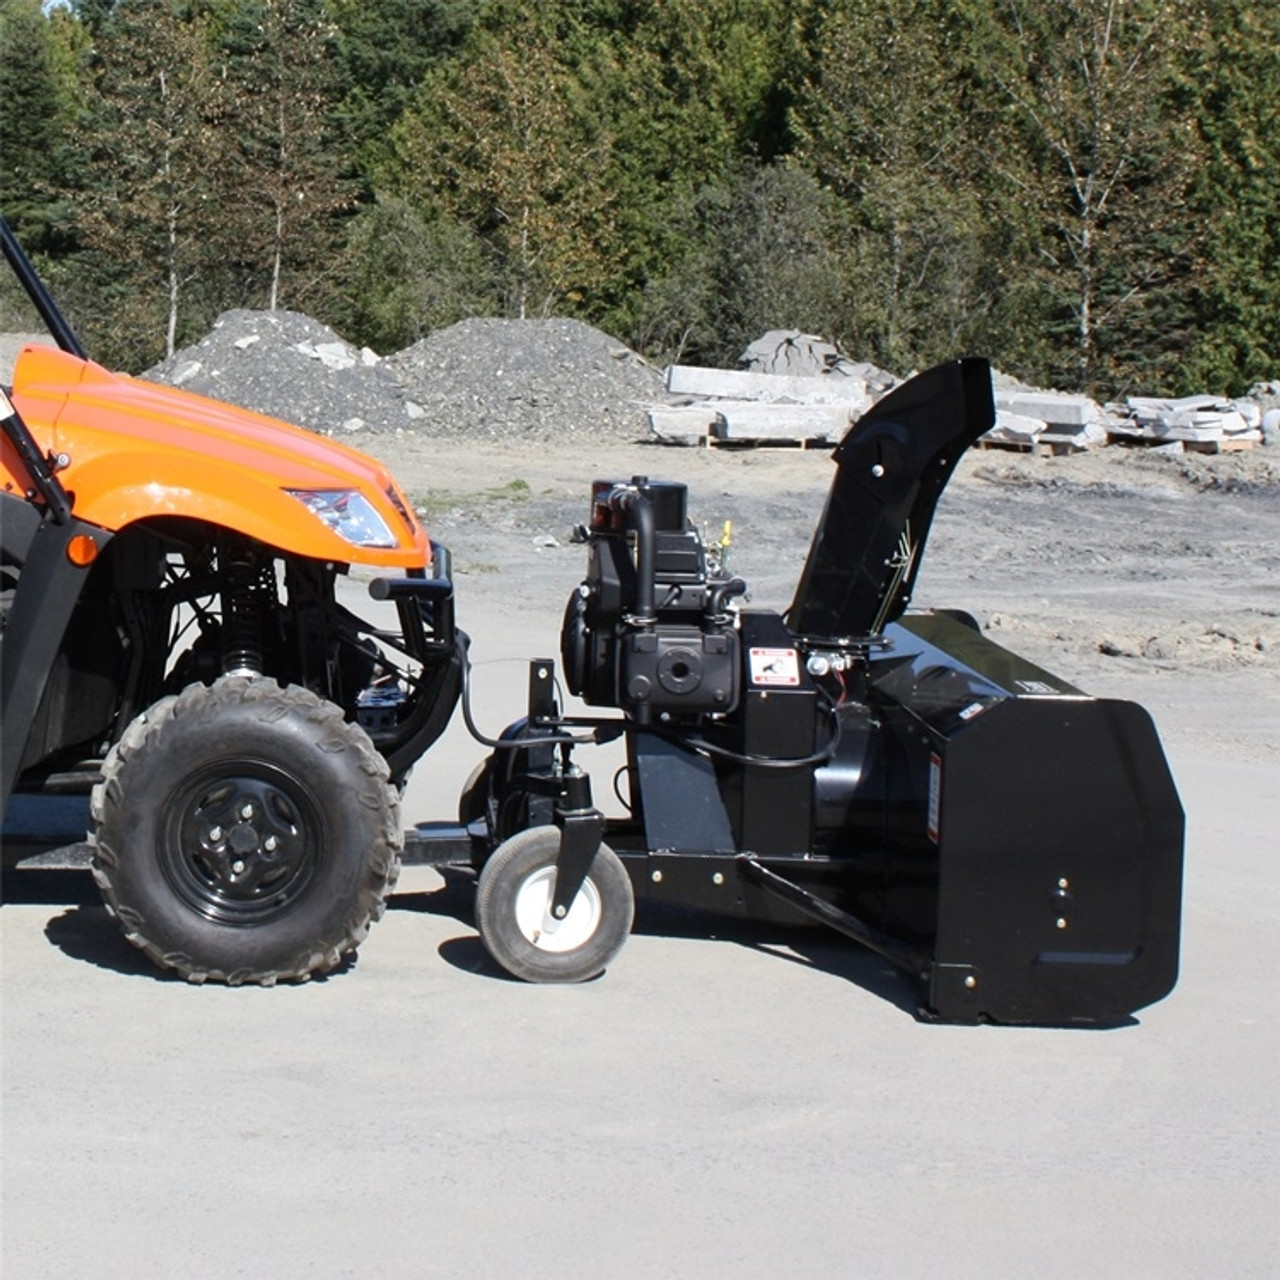 A side-view image of a Kubota RTV Snowblower by Bercomac, installed and parked on a concrete lot.